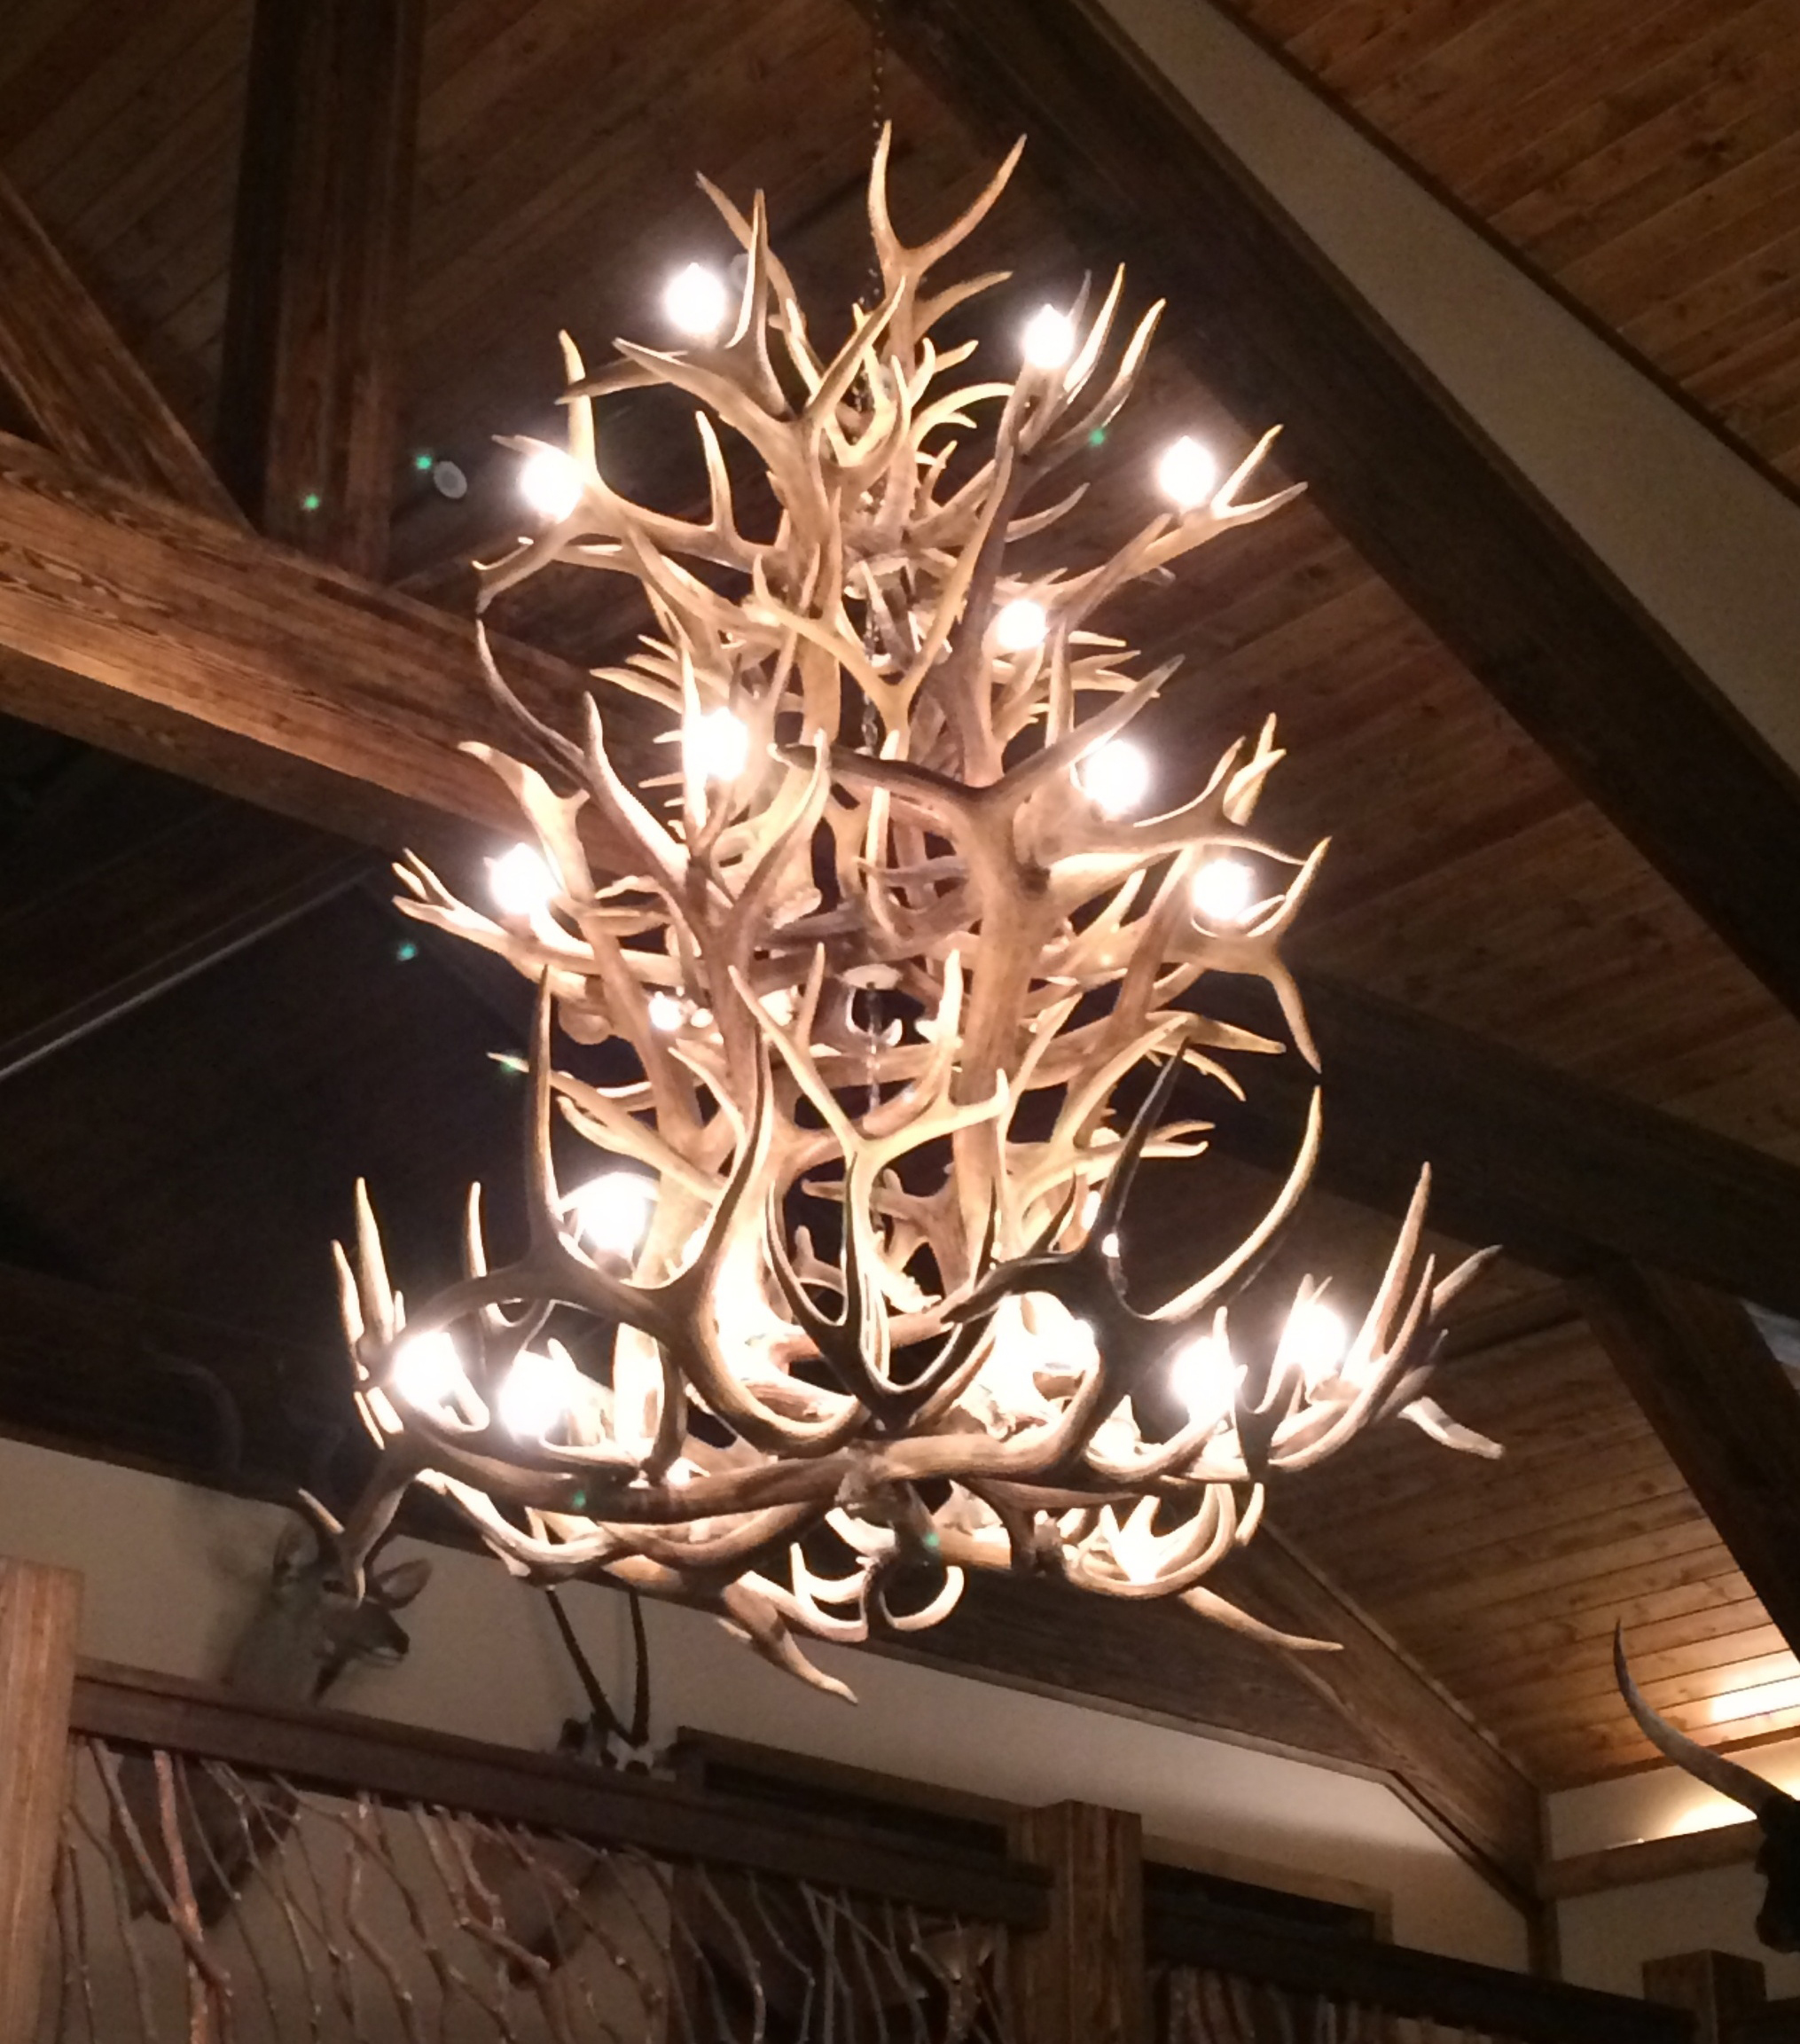 EFFORTINC Resin Antler Chandeliers 10 Light 41.7 Diameter X 19.3 Tall with 4 Feet Matching Chain Bulbs Not Included 